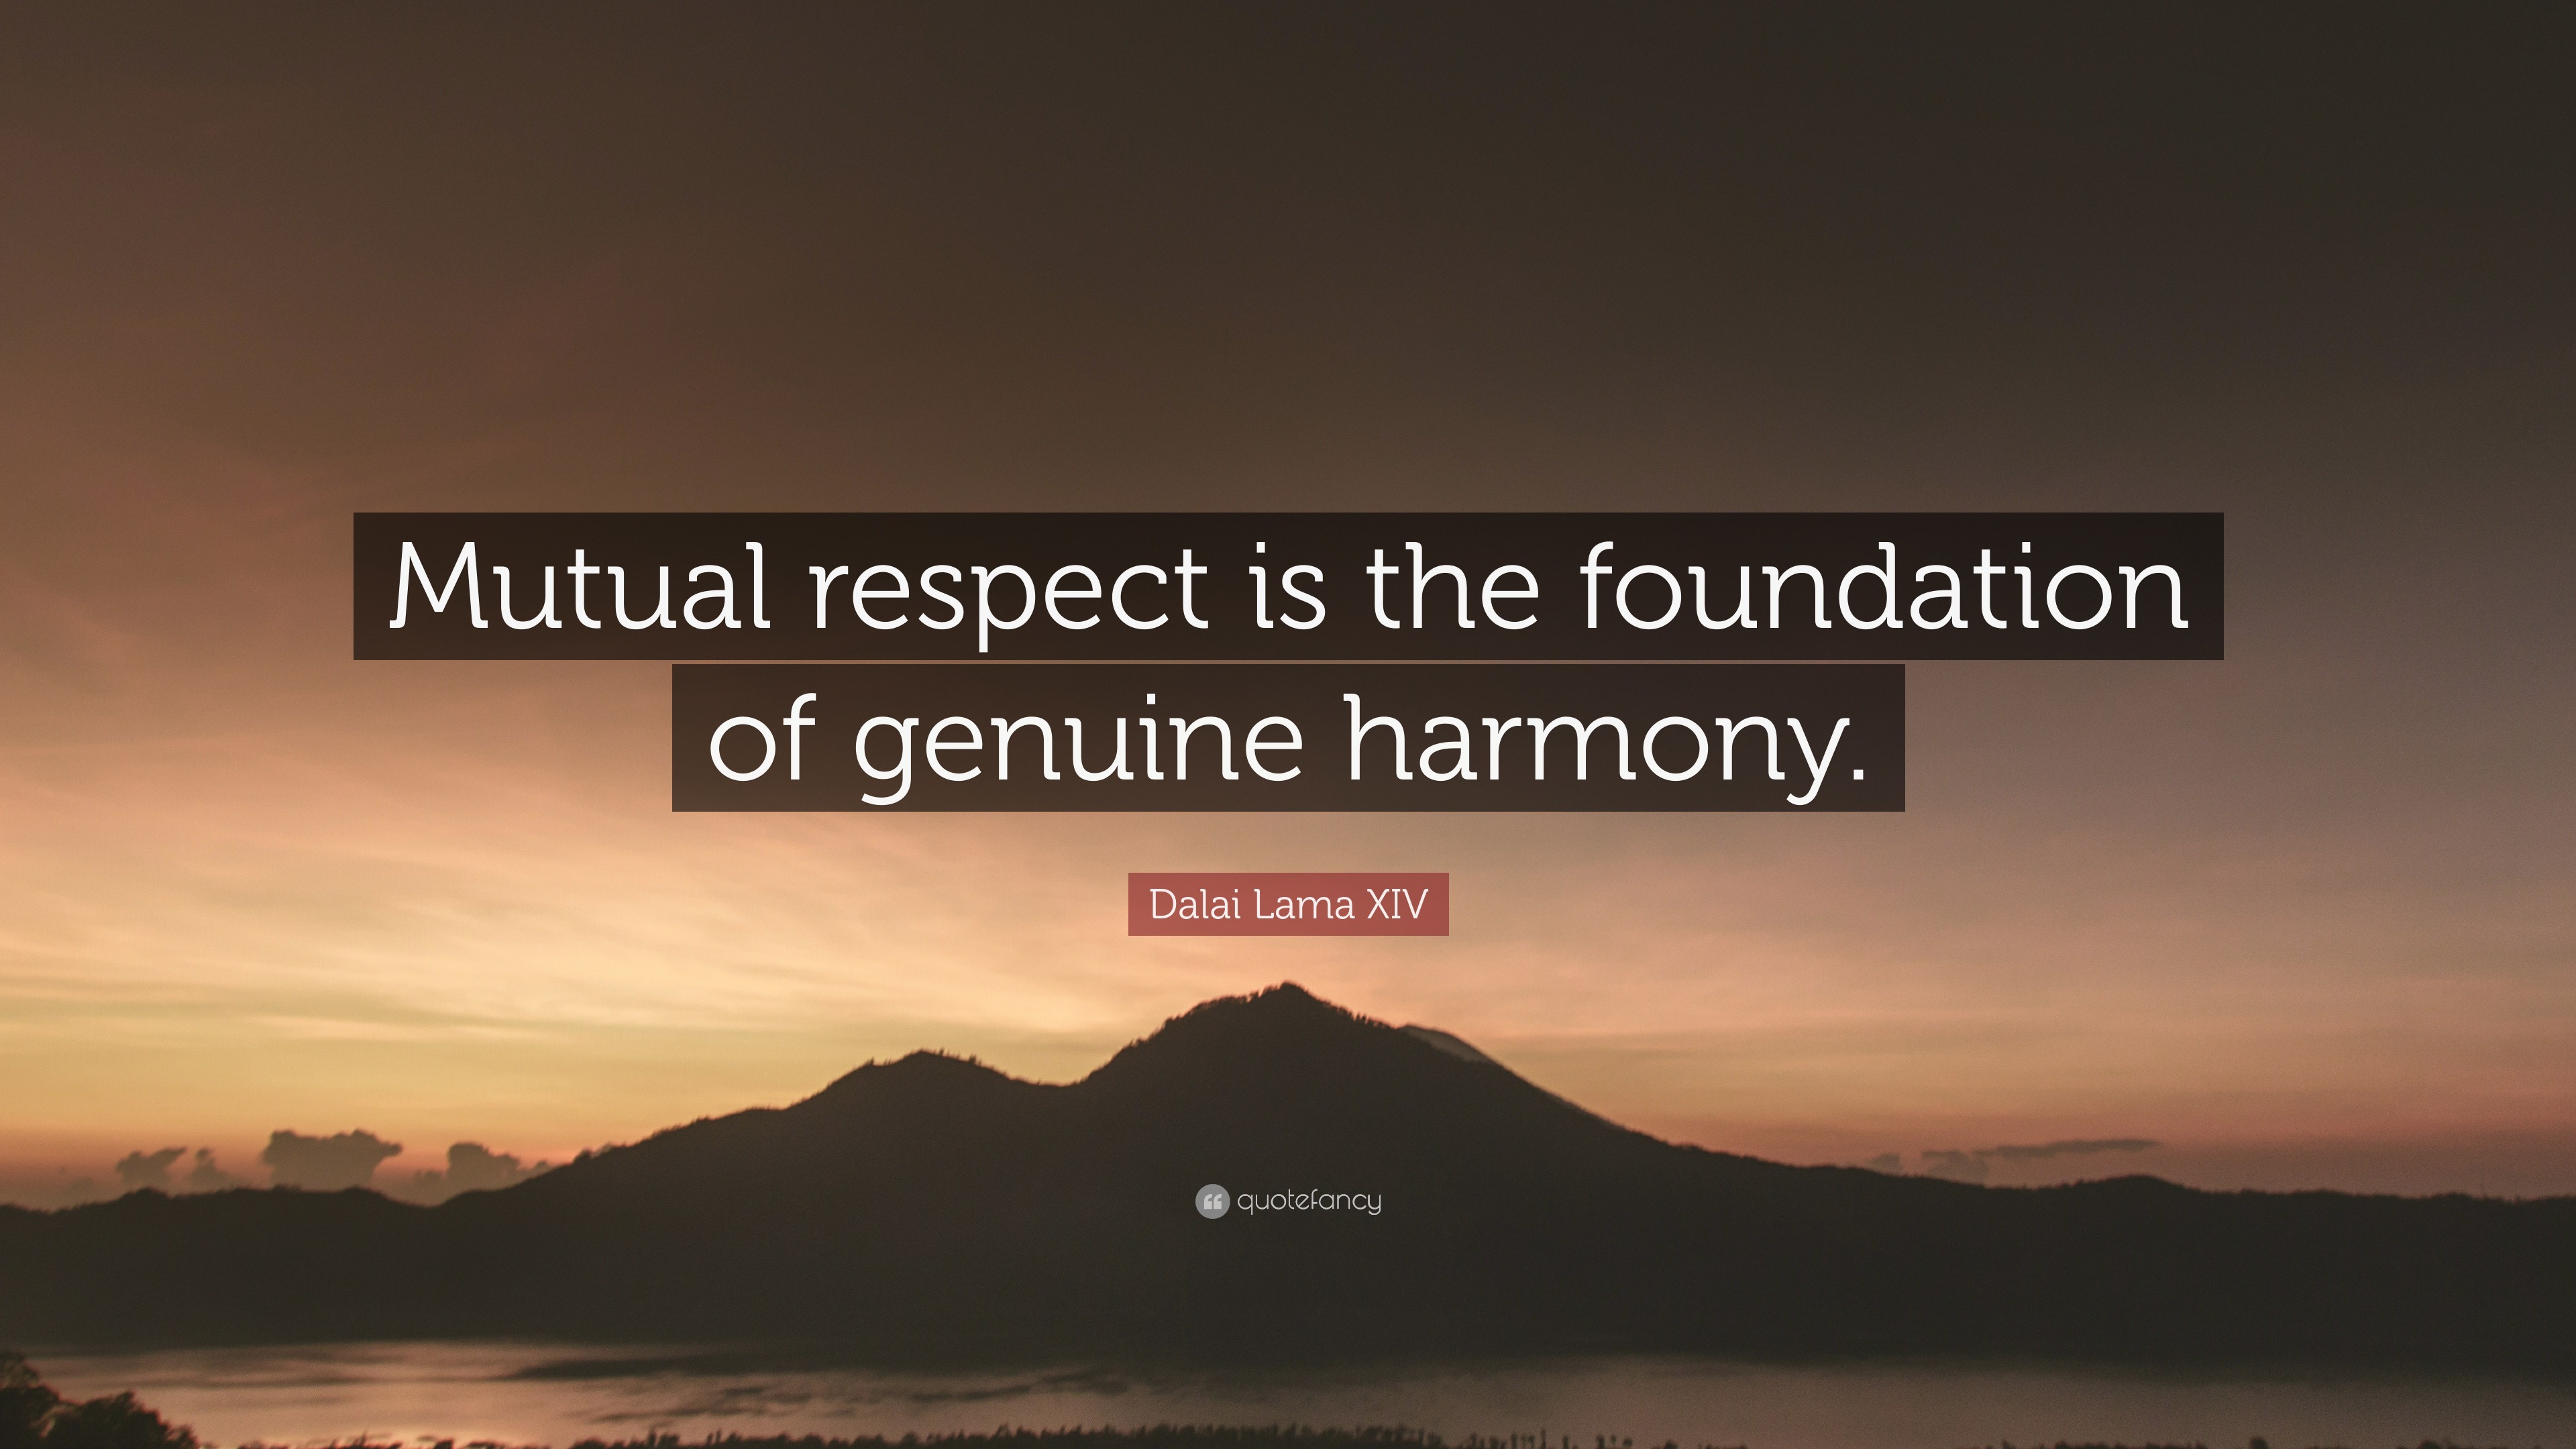 Dalai Lama Xiv Quote Mutual Respect Is The Foundation Of Genuine Harmony